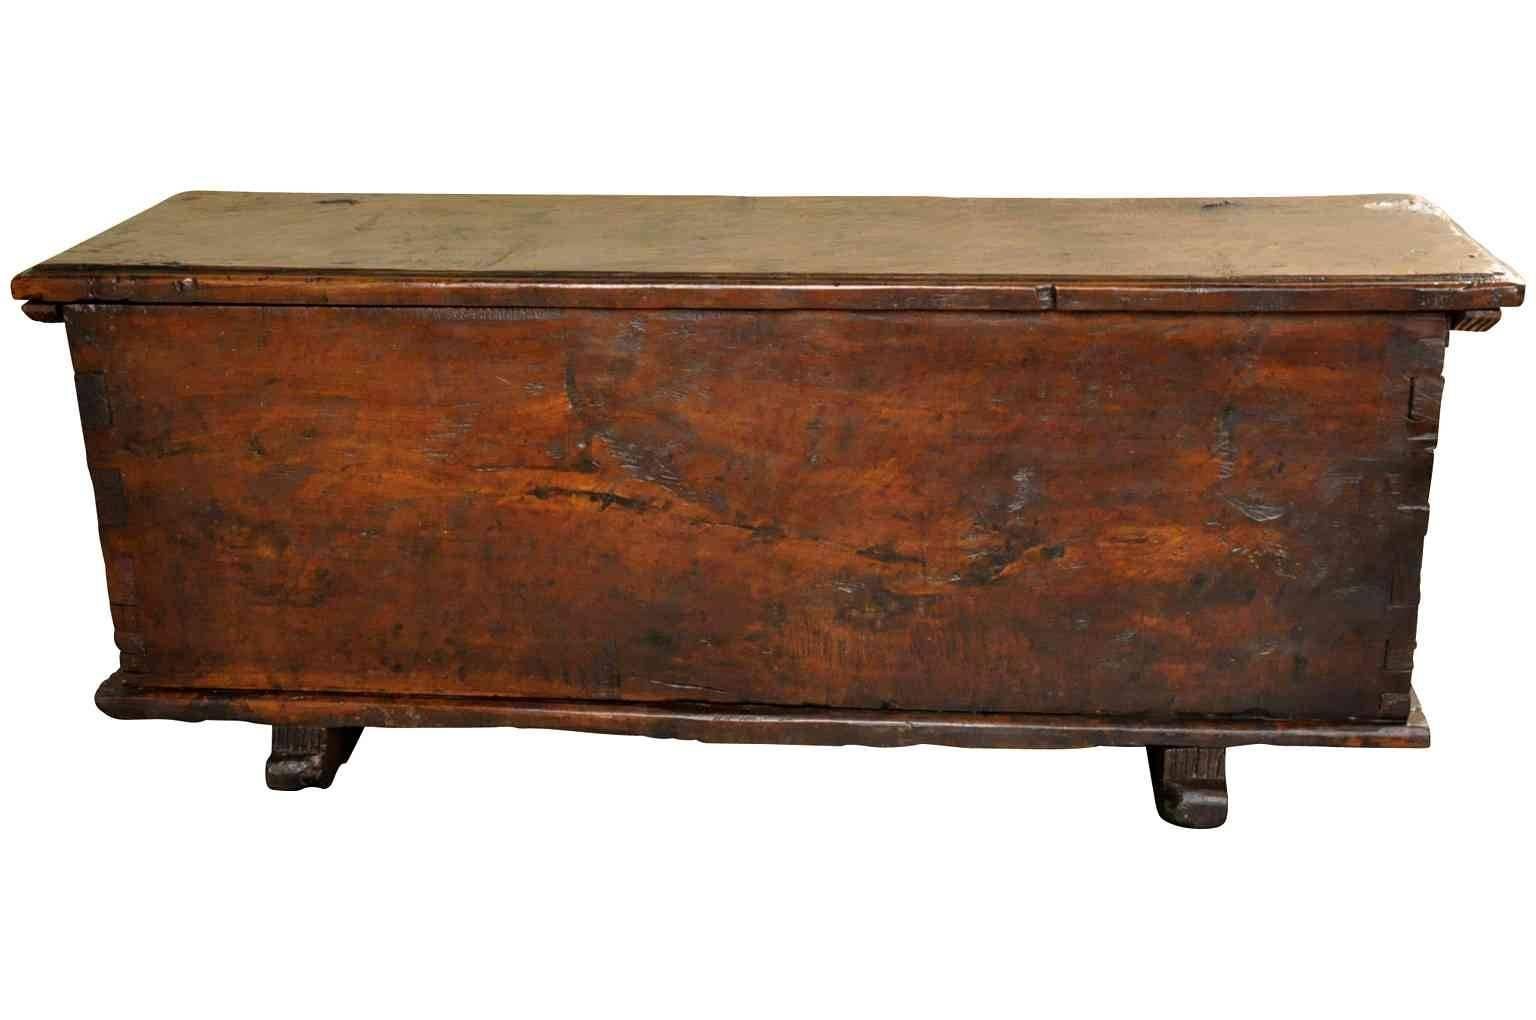 A very handsome 18th century cassone or storage trunk from Northern Italy. Beautifully constructed in hand hewn very thick planks of walnut. The graining and patina are simply exceptional. Mortise and tenon joints, raised on feet. Wonderful at the